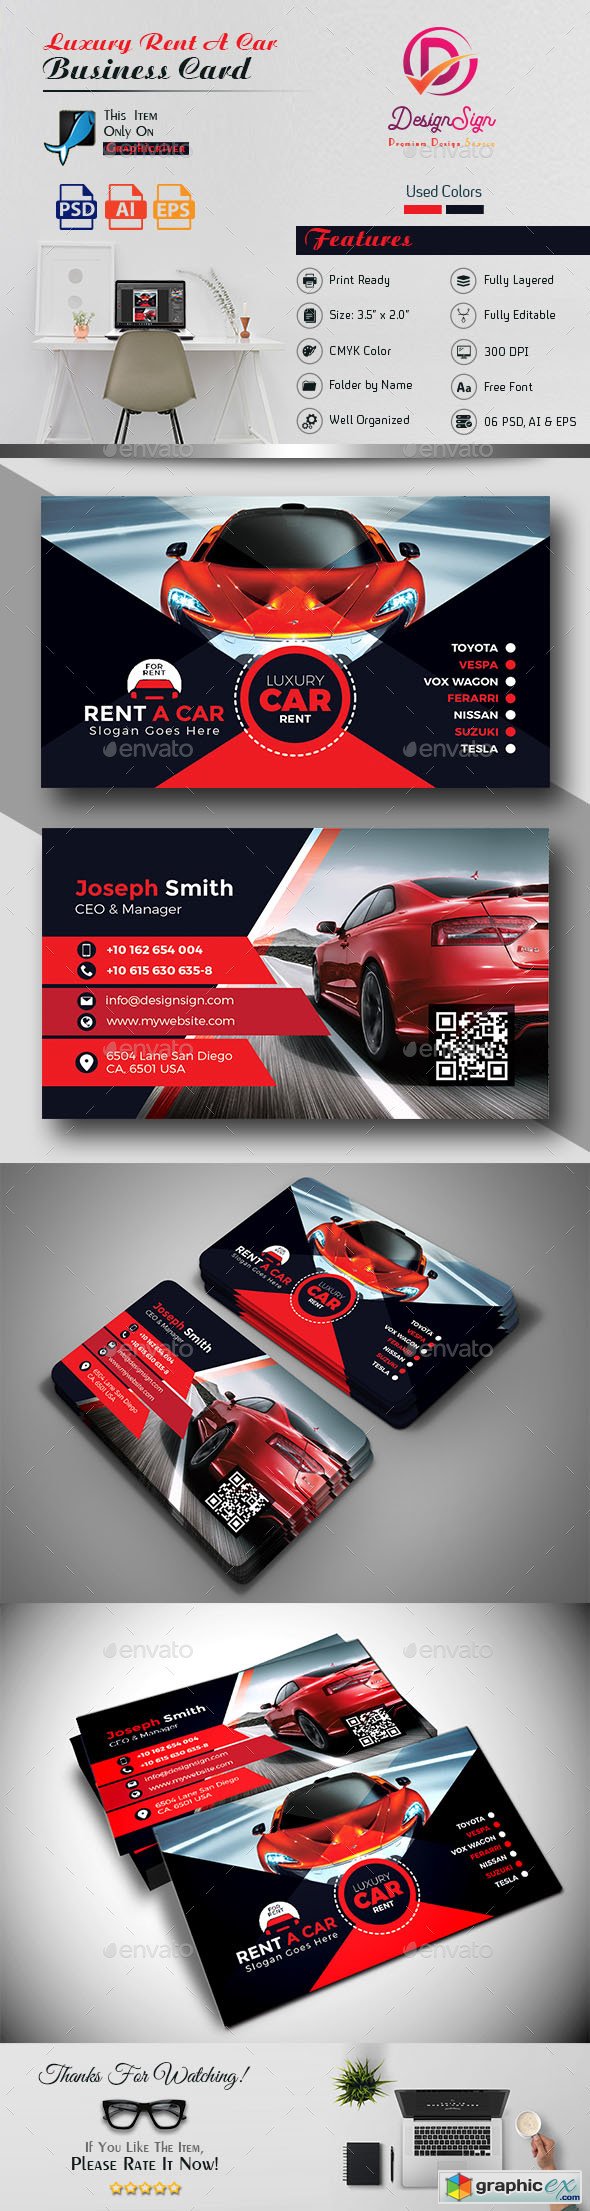 Luxury Rent A Car Business Card